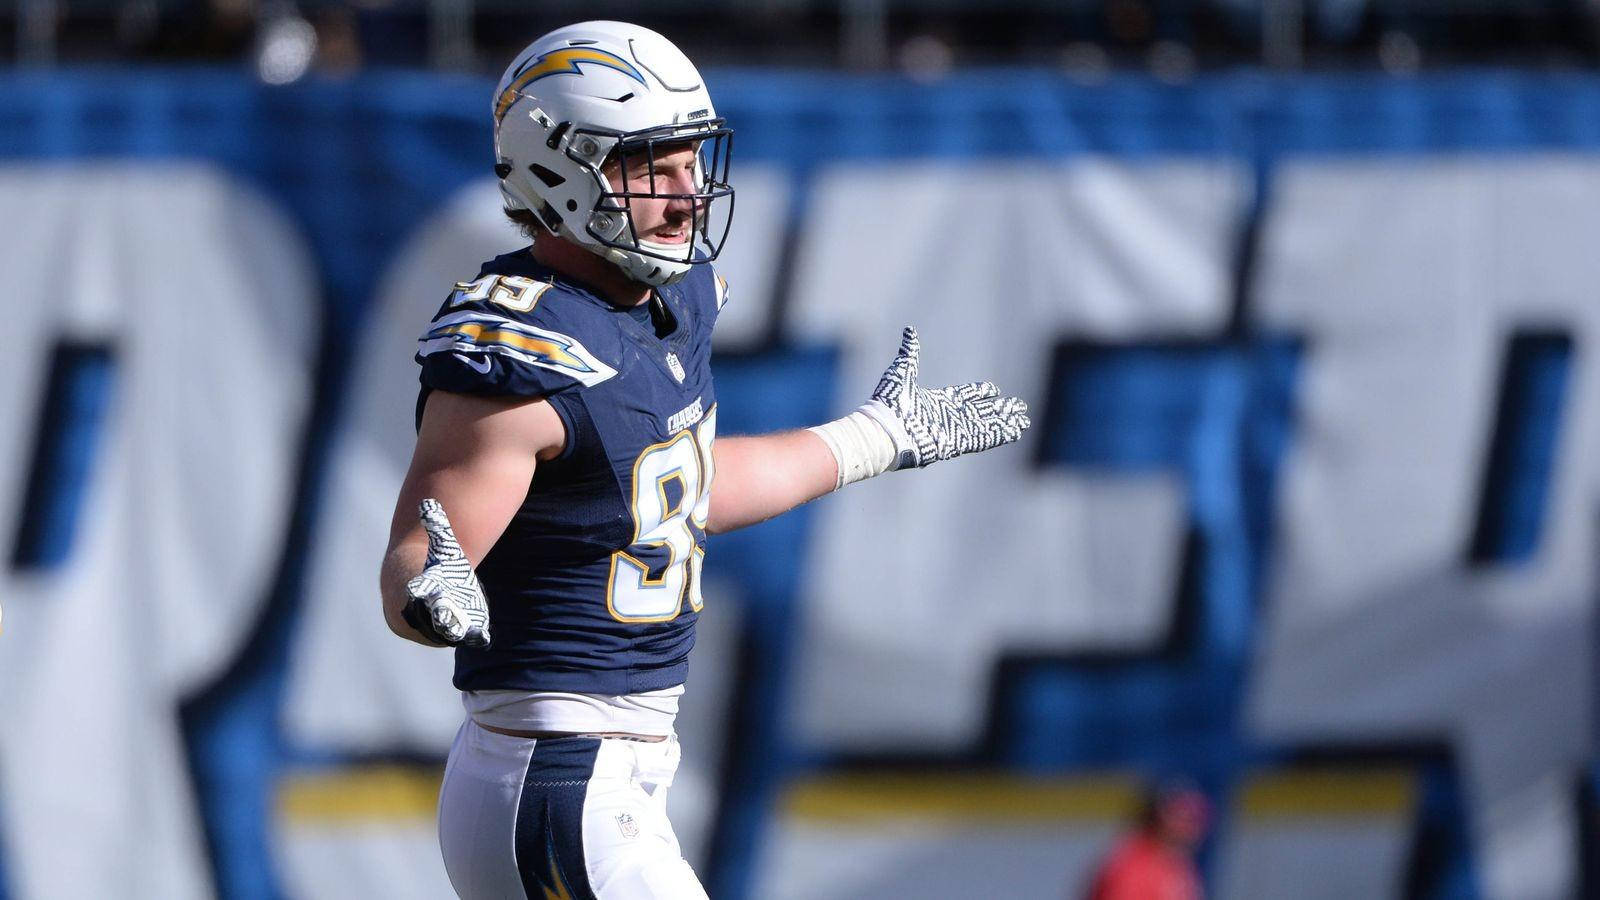 Legendejoey Bosa Los Angeles Chargers. Wallpaper